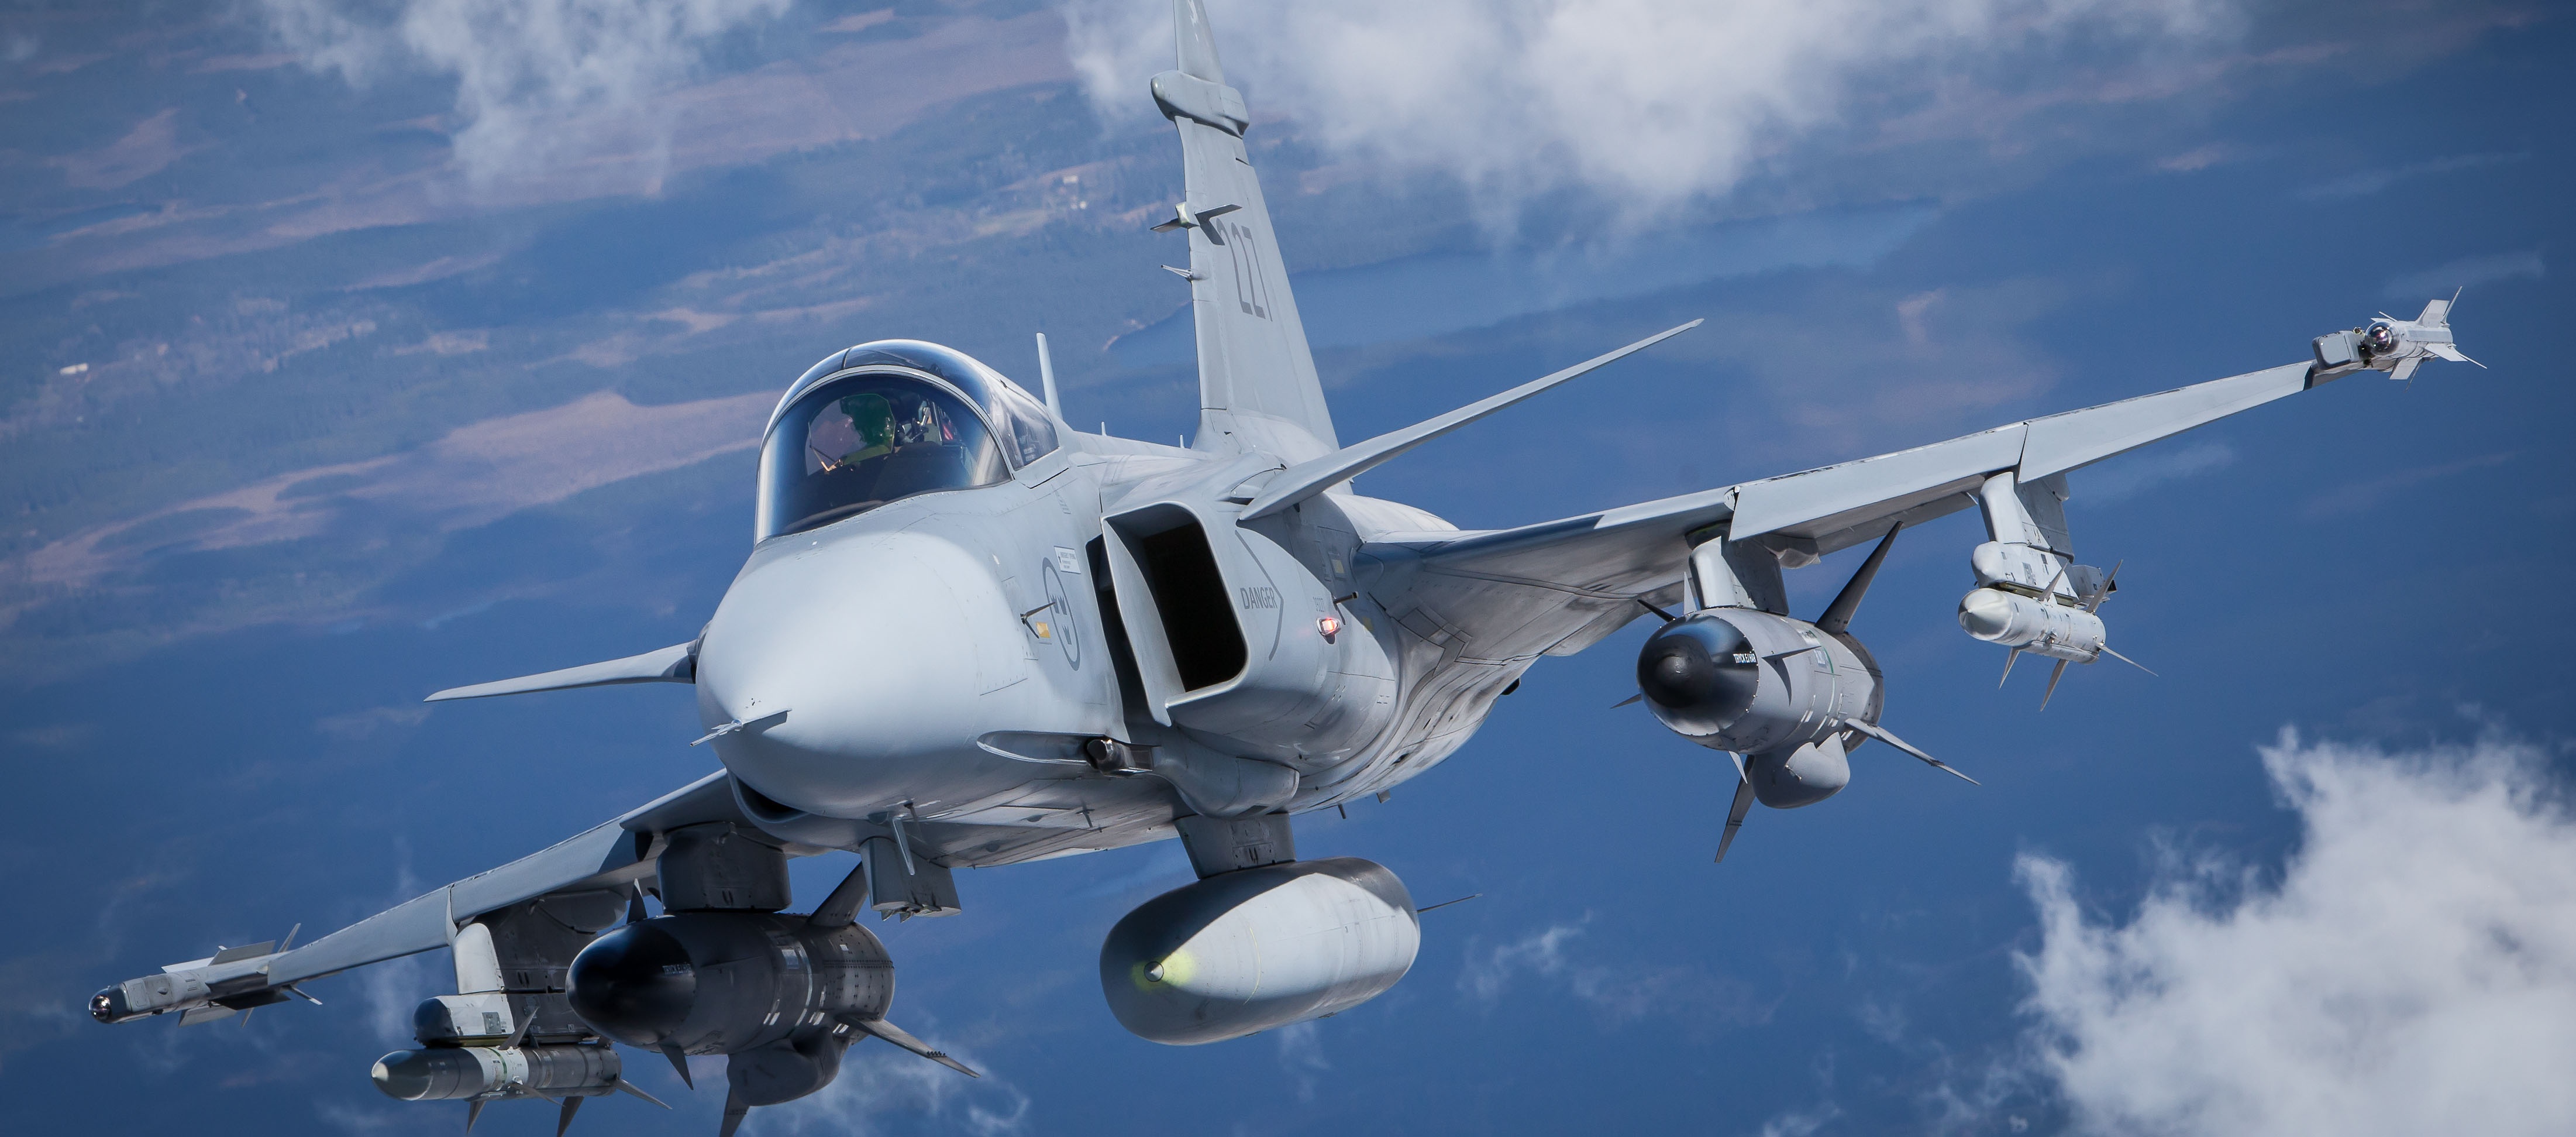 Saab Jas 39 Gripen wallpapers for desktop, download free Saab Jas 39 Gripen  pictures and backgrounds for PC 